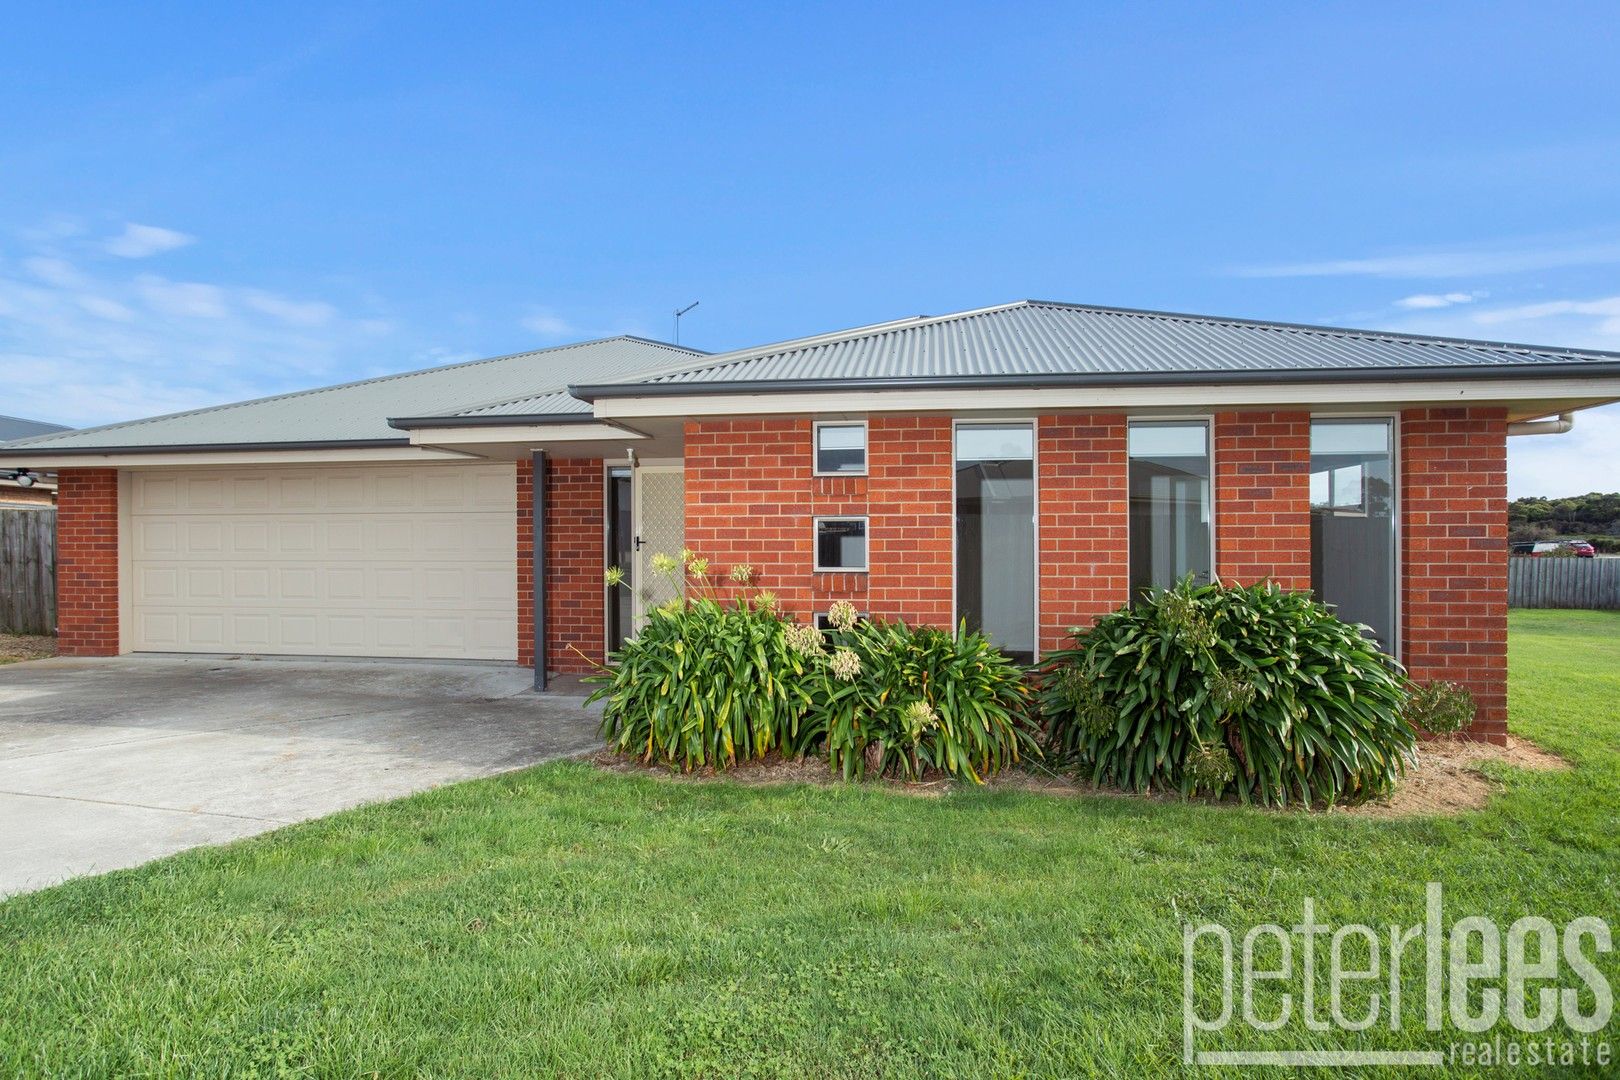 4 bedrooms House in 9 Axton Close GEORGE TOWN TAS, 7253